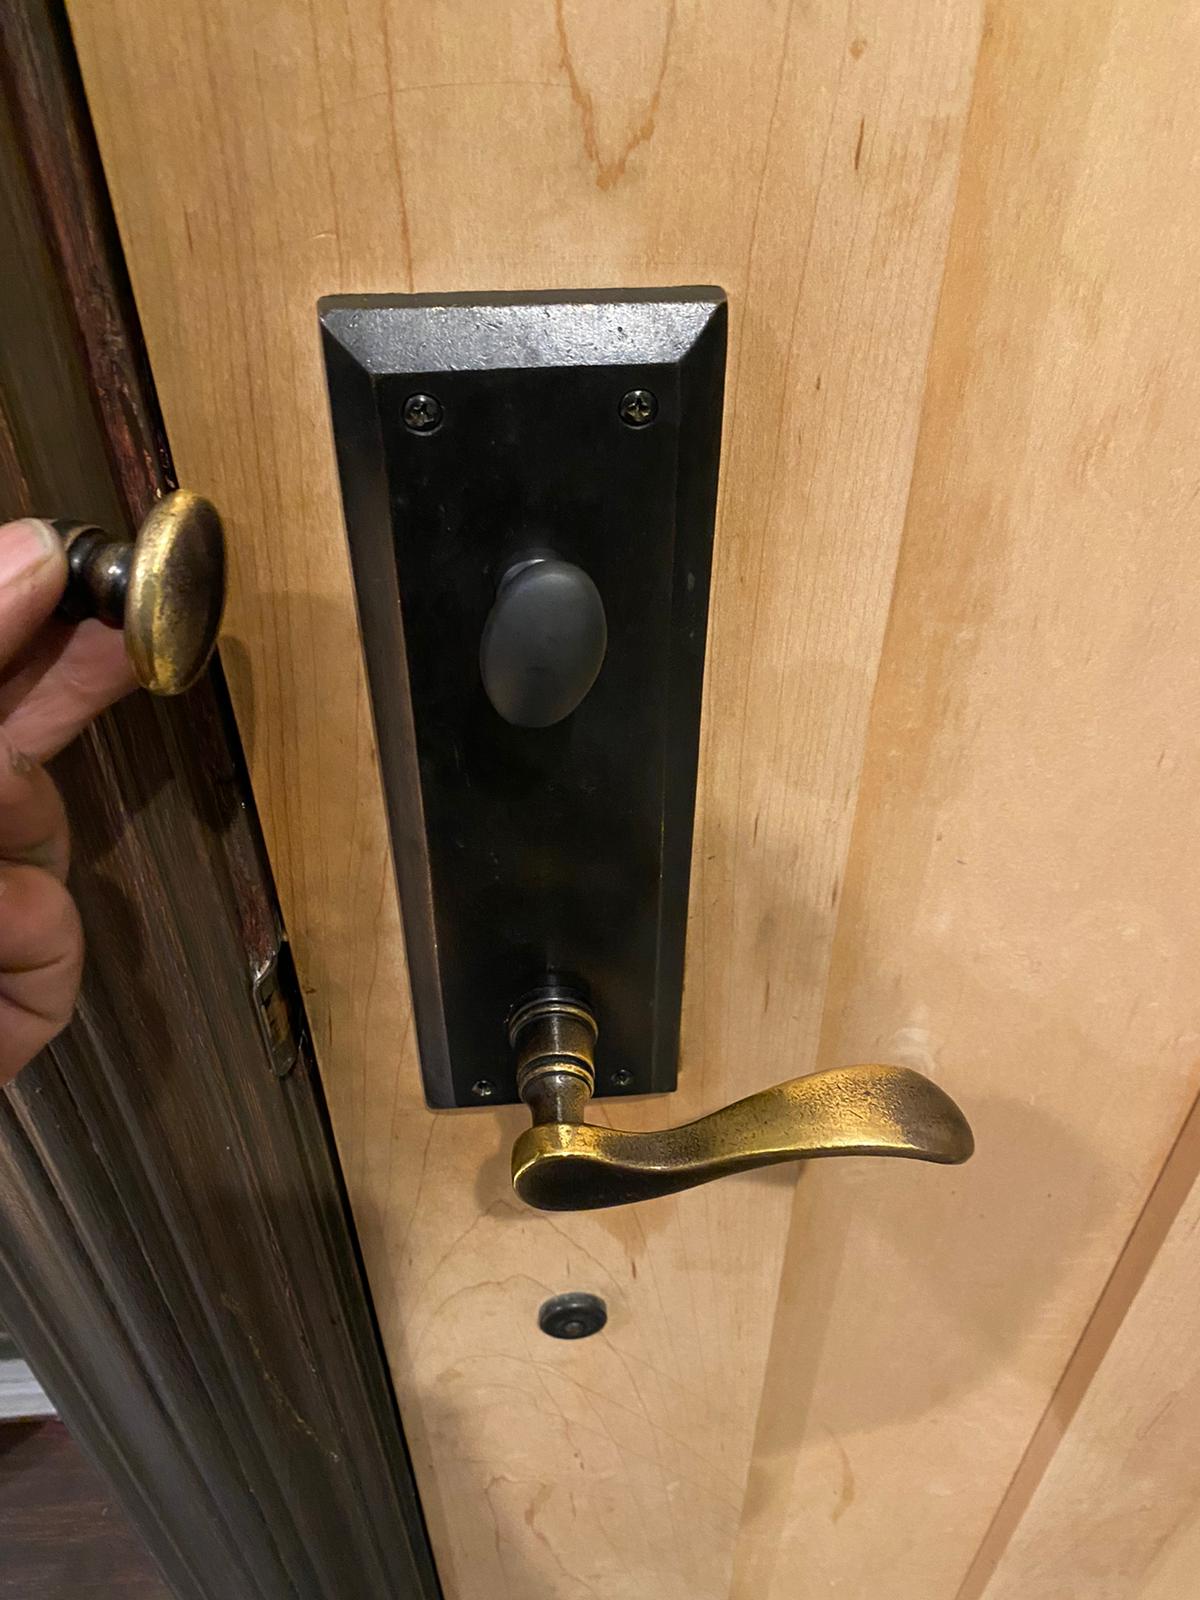 All you need to know about Door handles: Locksmith Monkey